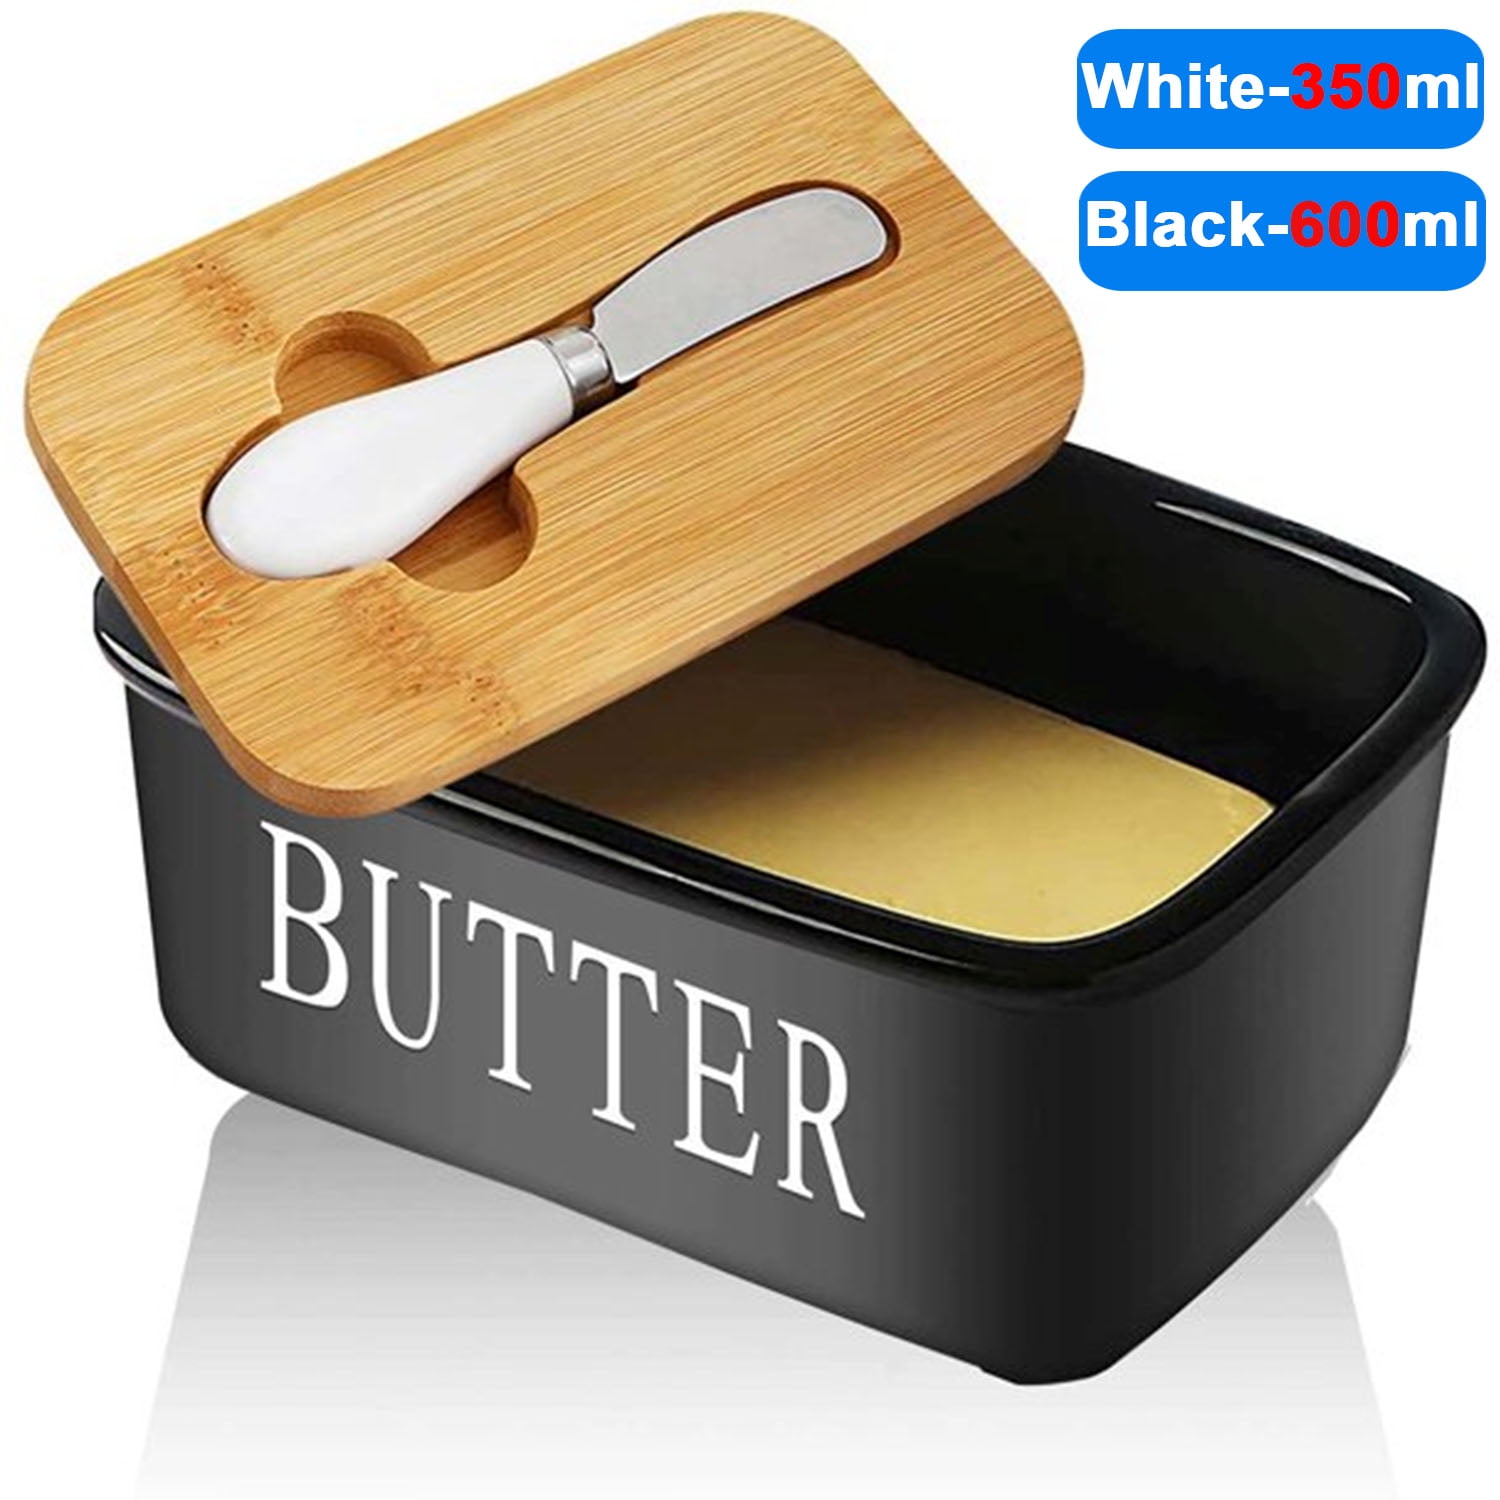 Edtian Butter Dish, Butter Keeper Butter Dish with Lid and Knife